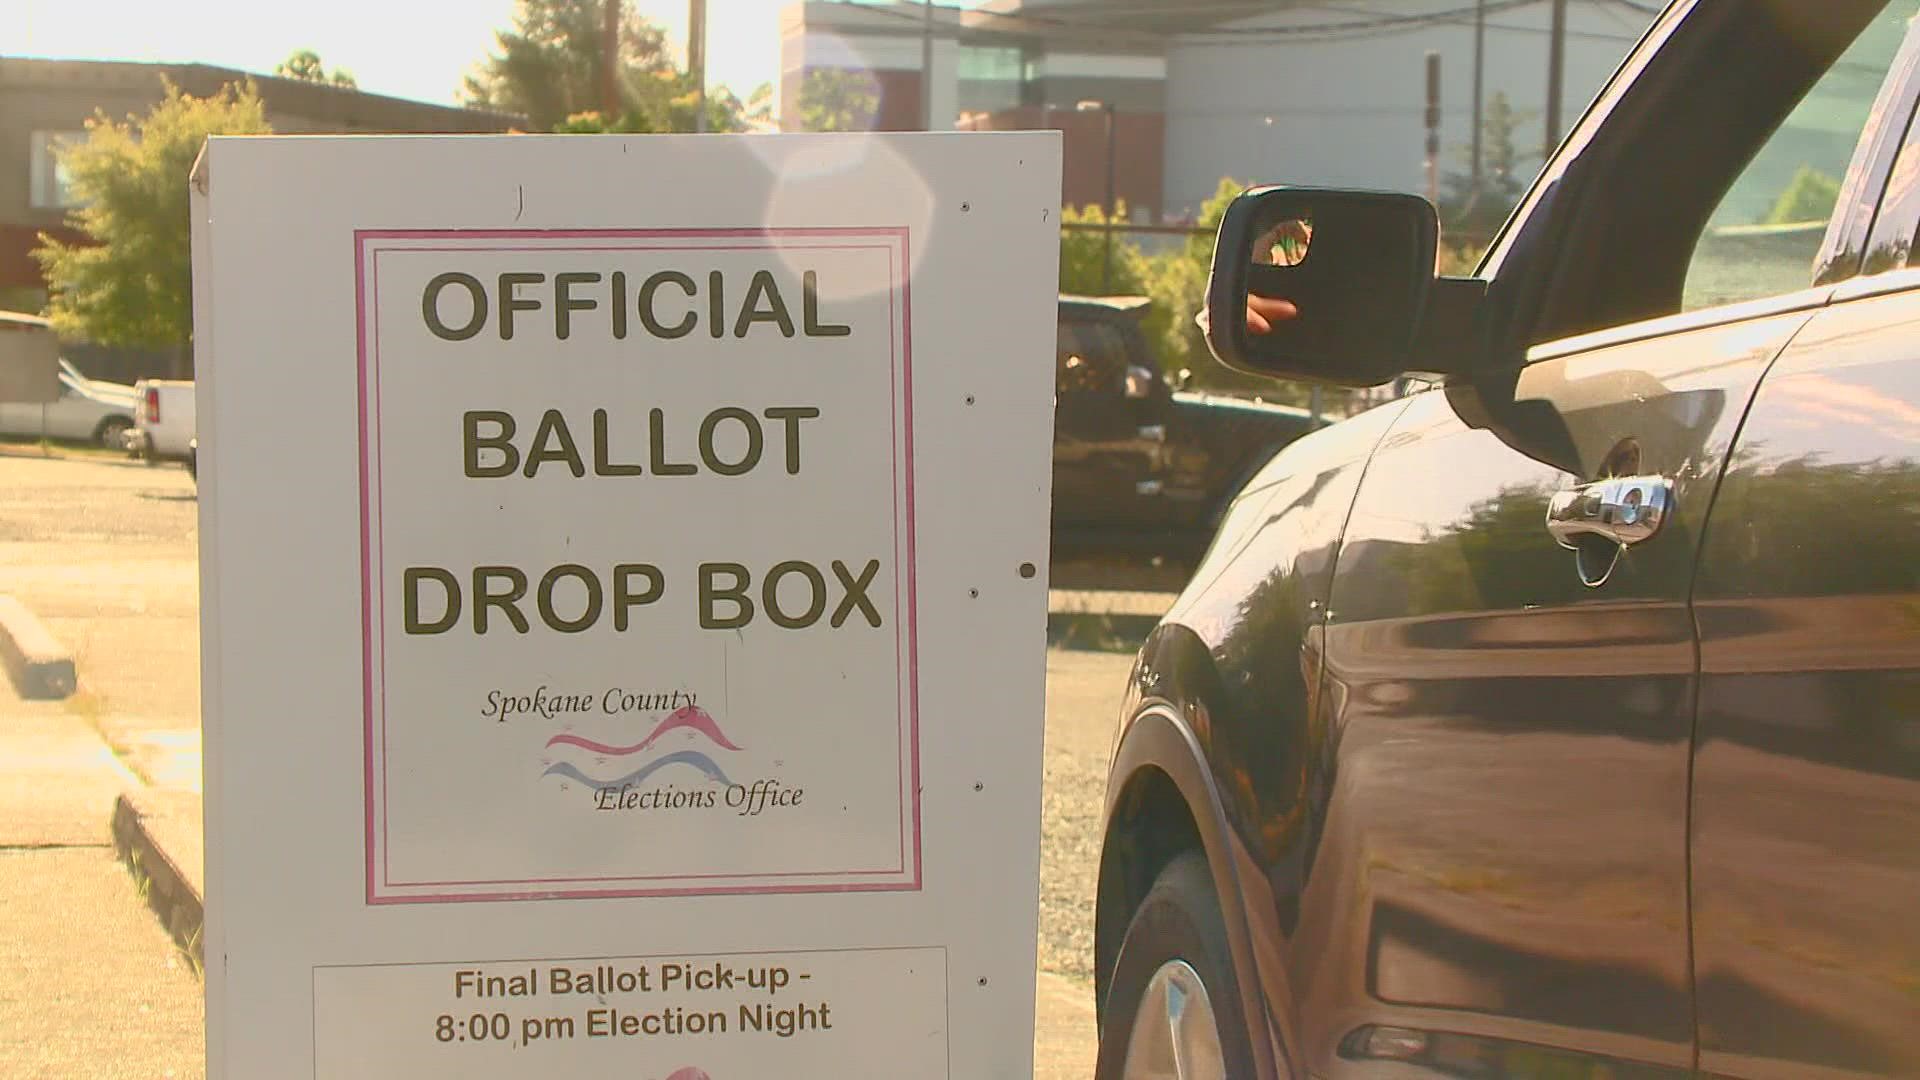 Two new locations are opening up in Spokane as the primary gets closer and closer.